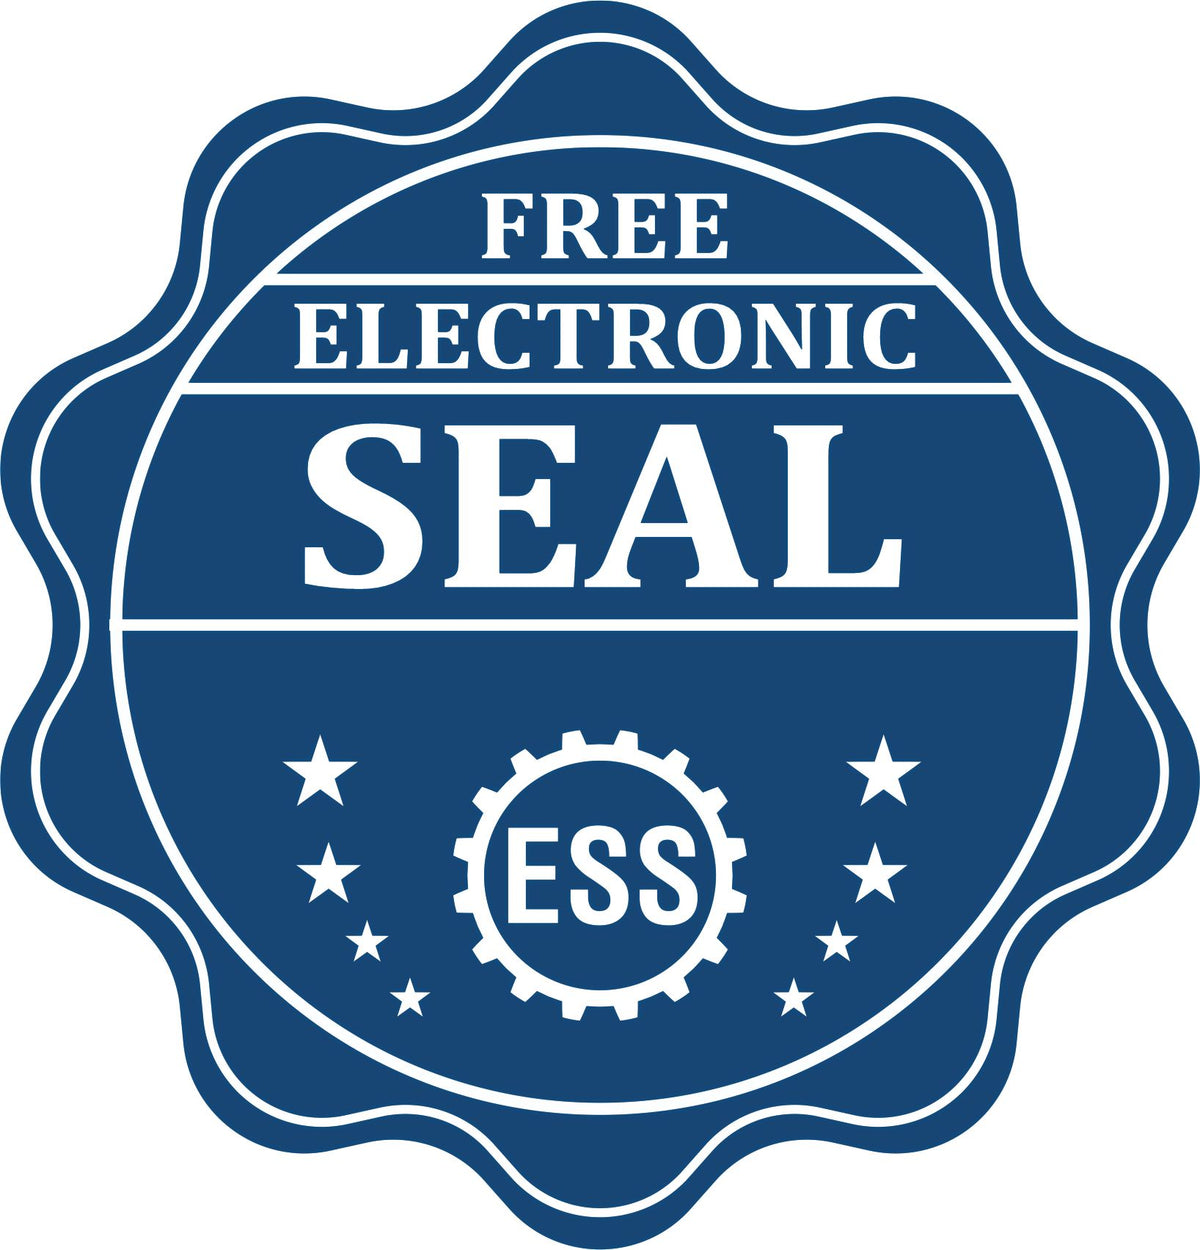 A badge showing a free electronic seal for the Wooden Handle Illinois Rectangular Notary Public Stamp with stars and the ESS gear on the emblem.